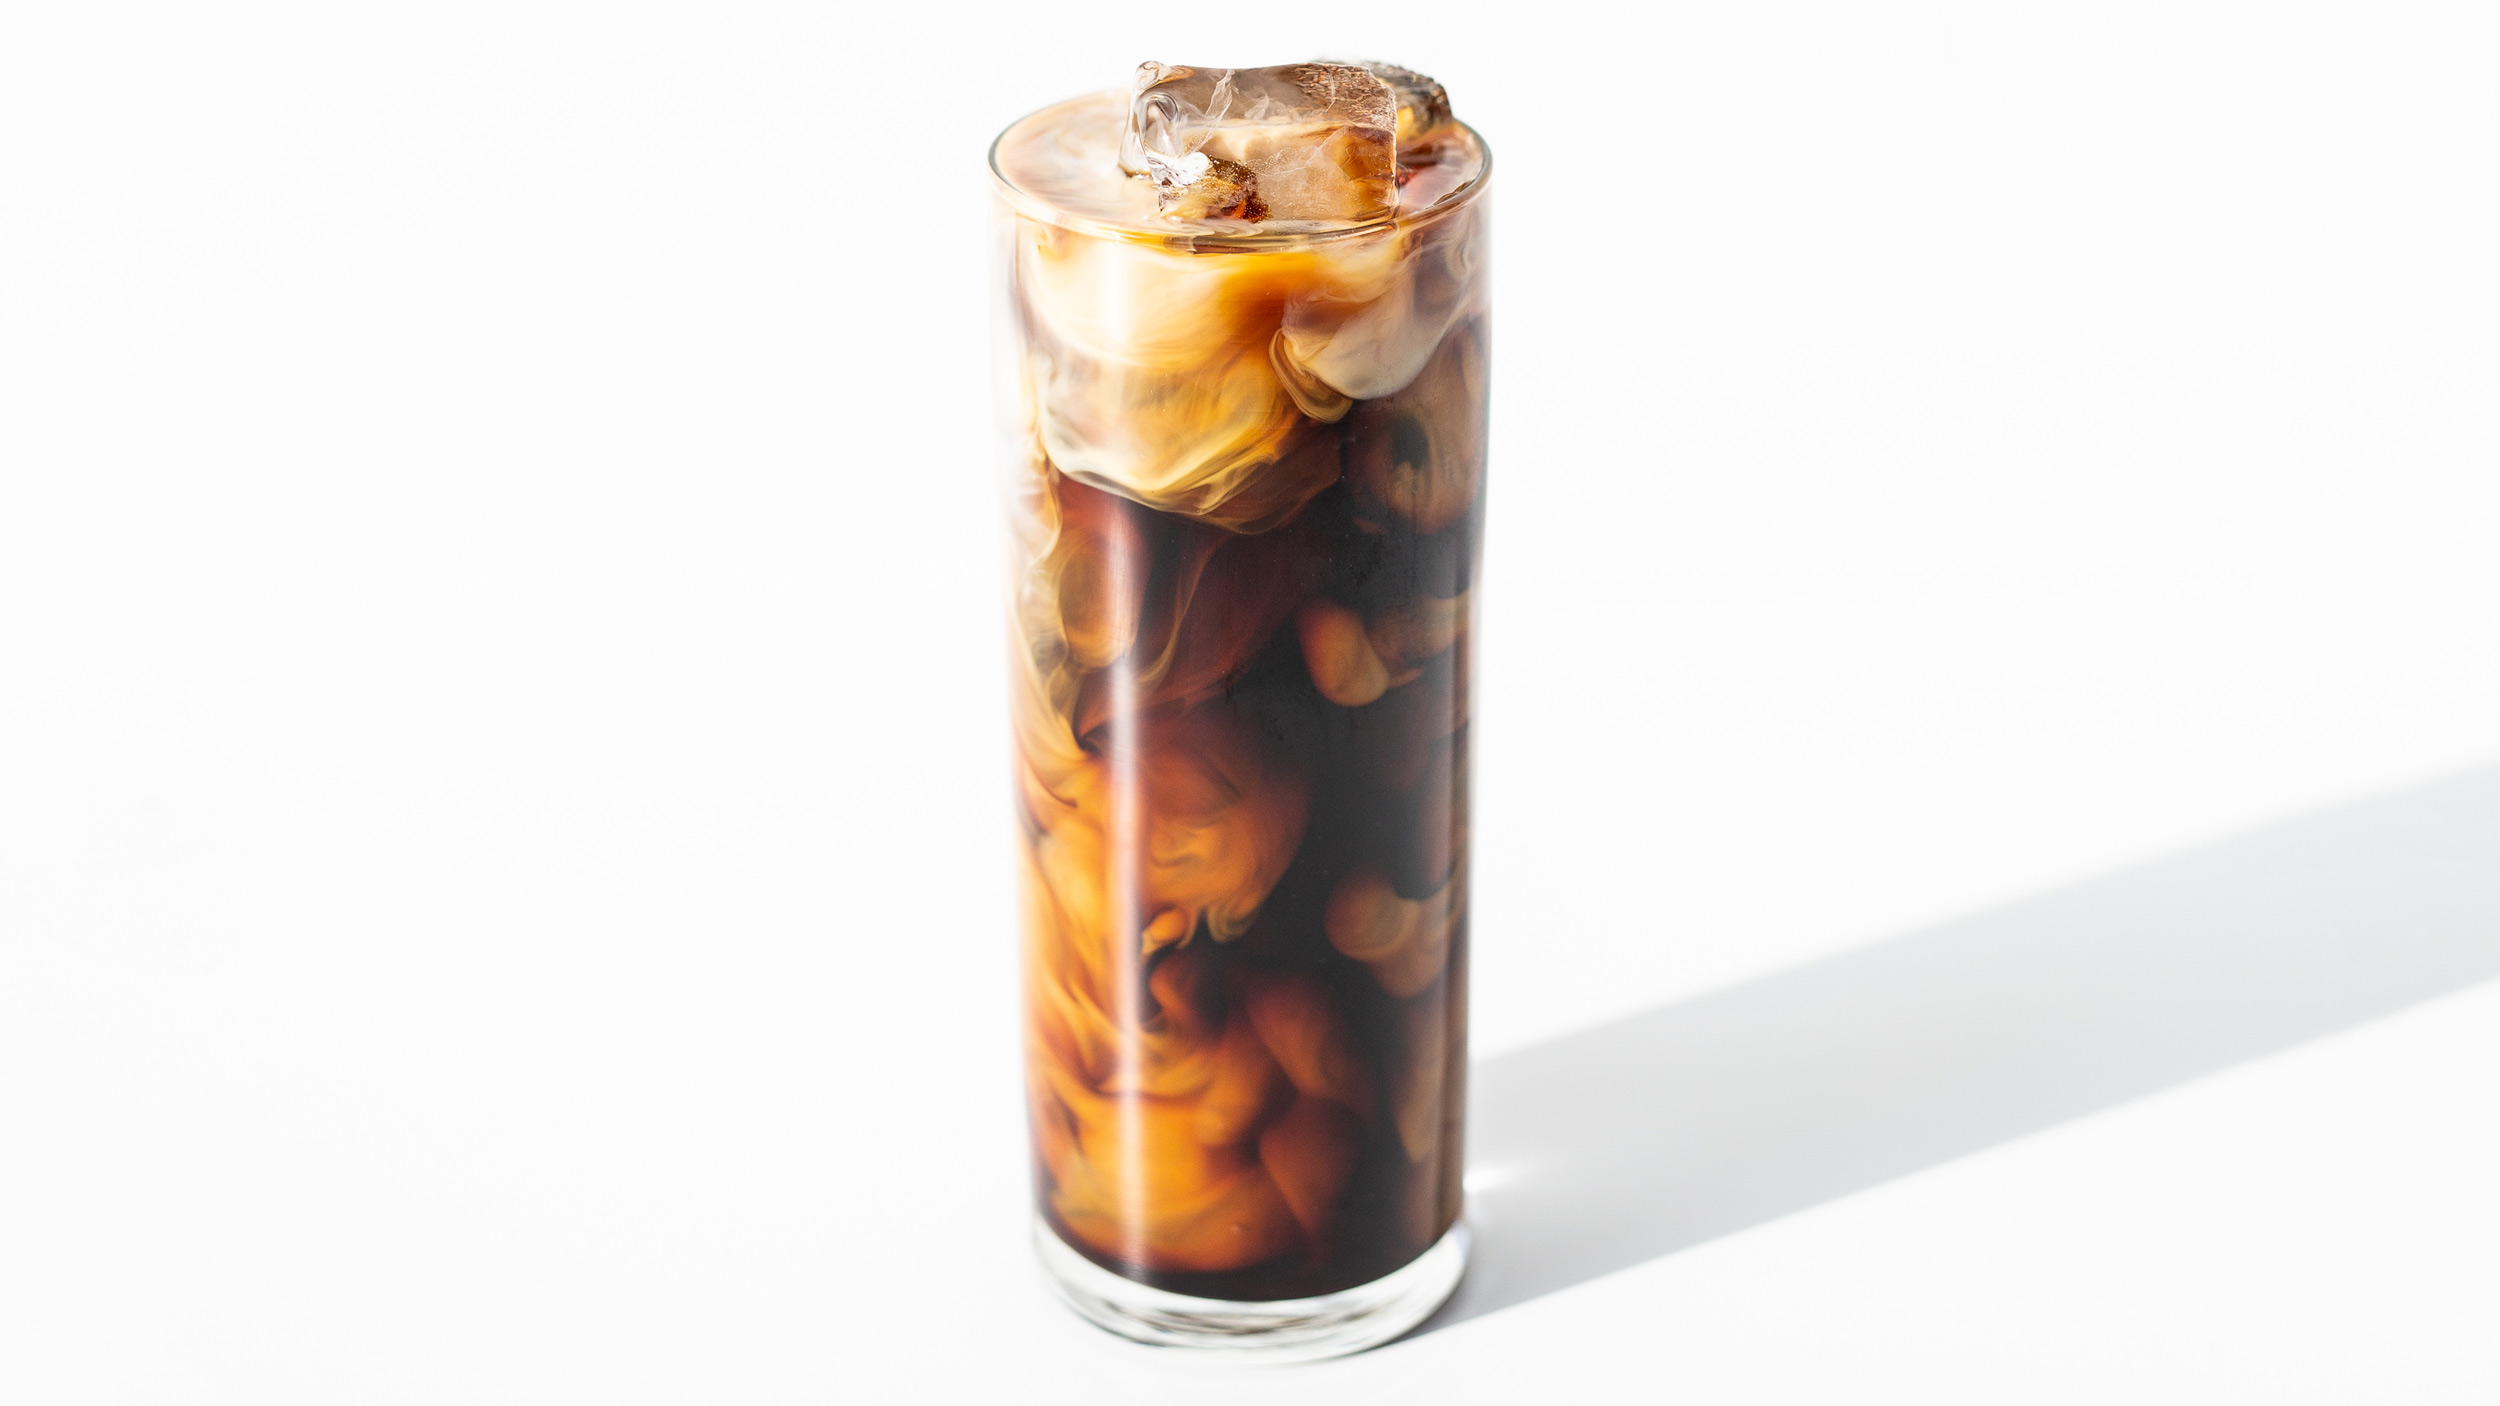 Boston Iced Coffee: The essential cool-down remedy for these hot Durban  days! ☀️🥤